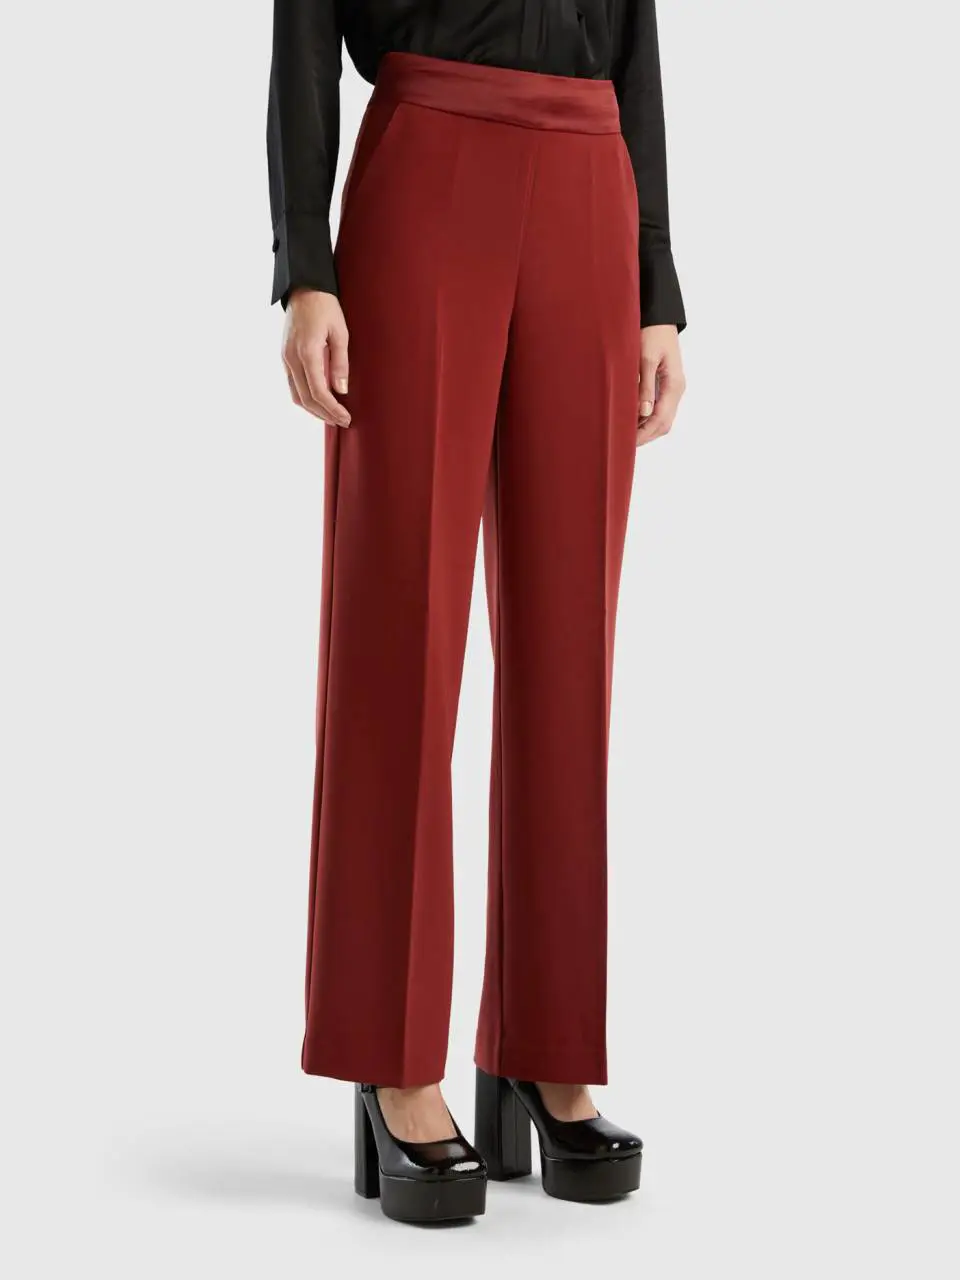 Benetton trousers with satin belt. 1